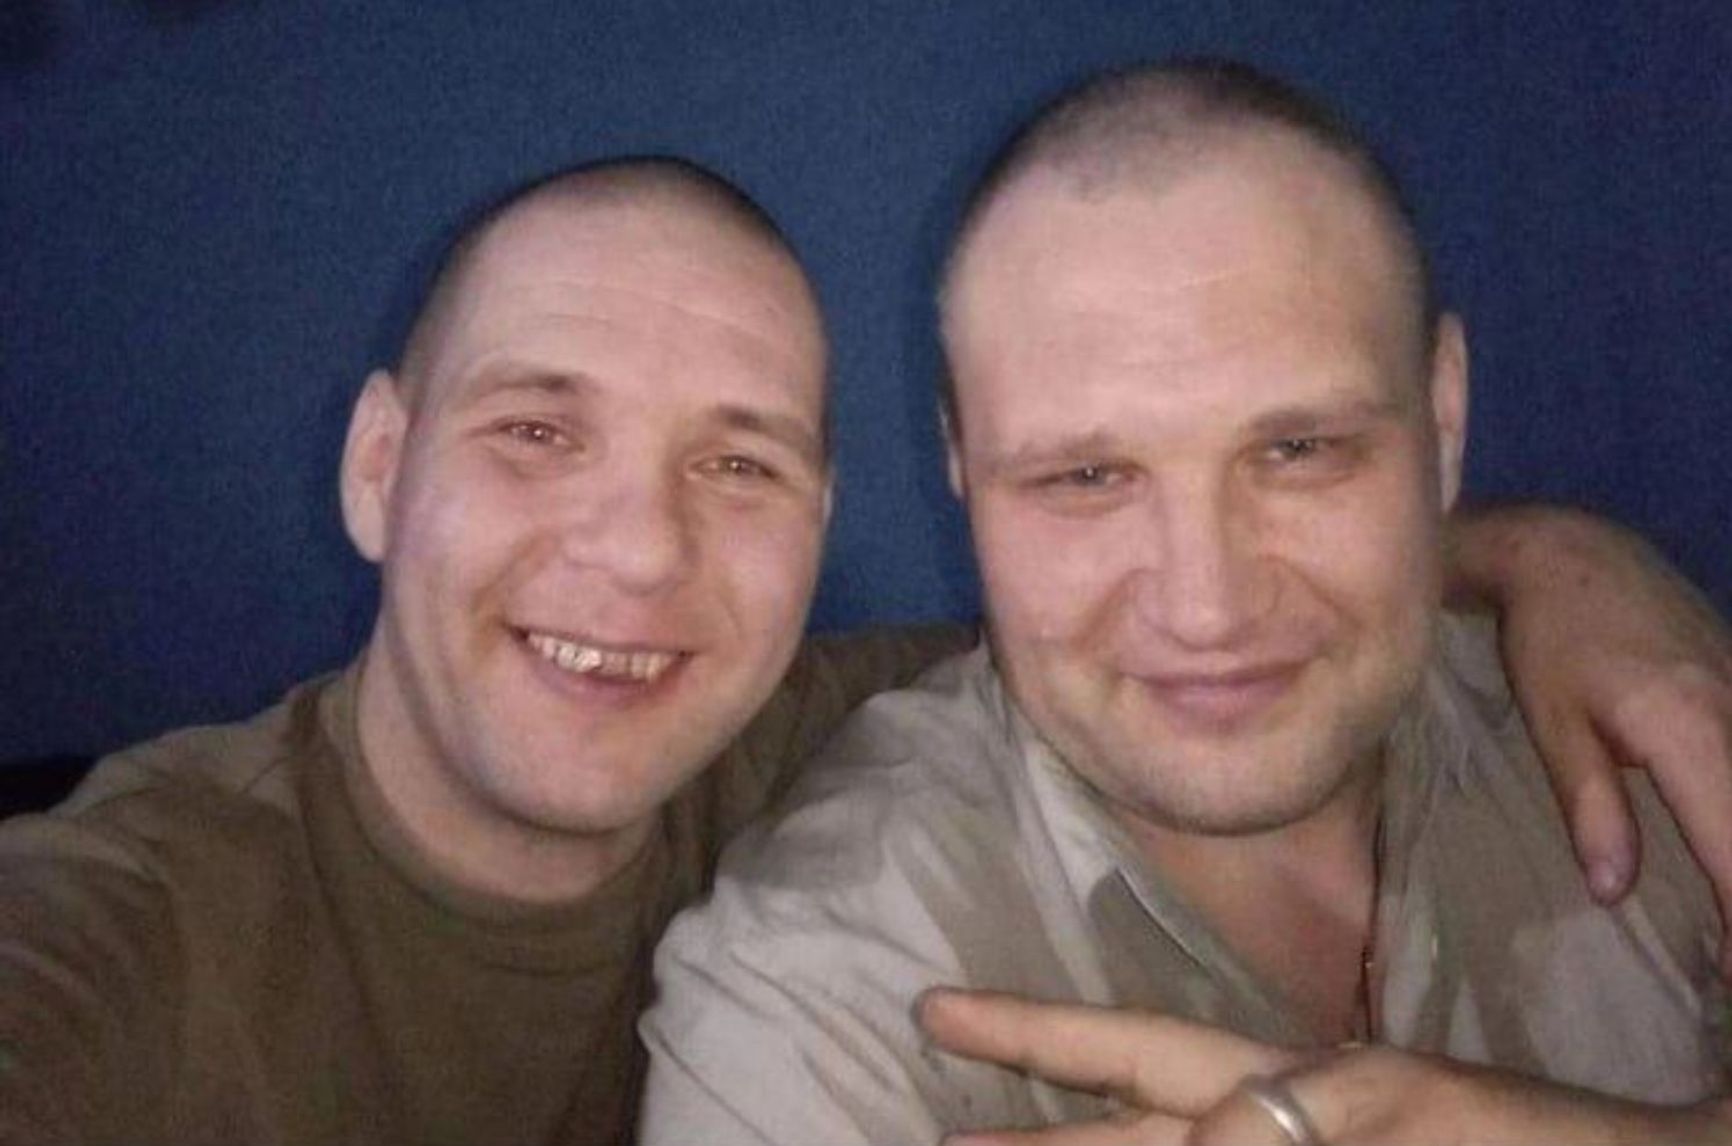  “Storm Z” / “Storm V” personnel: Dmitry Malyshev, sentenced to 25 years in 2015 for murdering a man and filming himself eating the victim’s heart, takes a selfie with Alexander Maslennikov, who got 23 years for murdering and dismembering two women he met at a nightclub